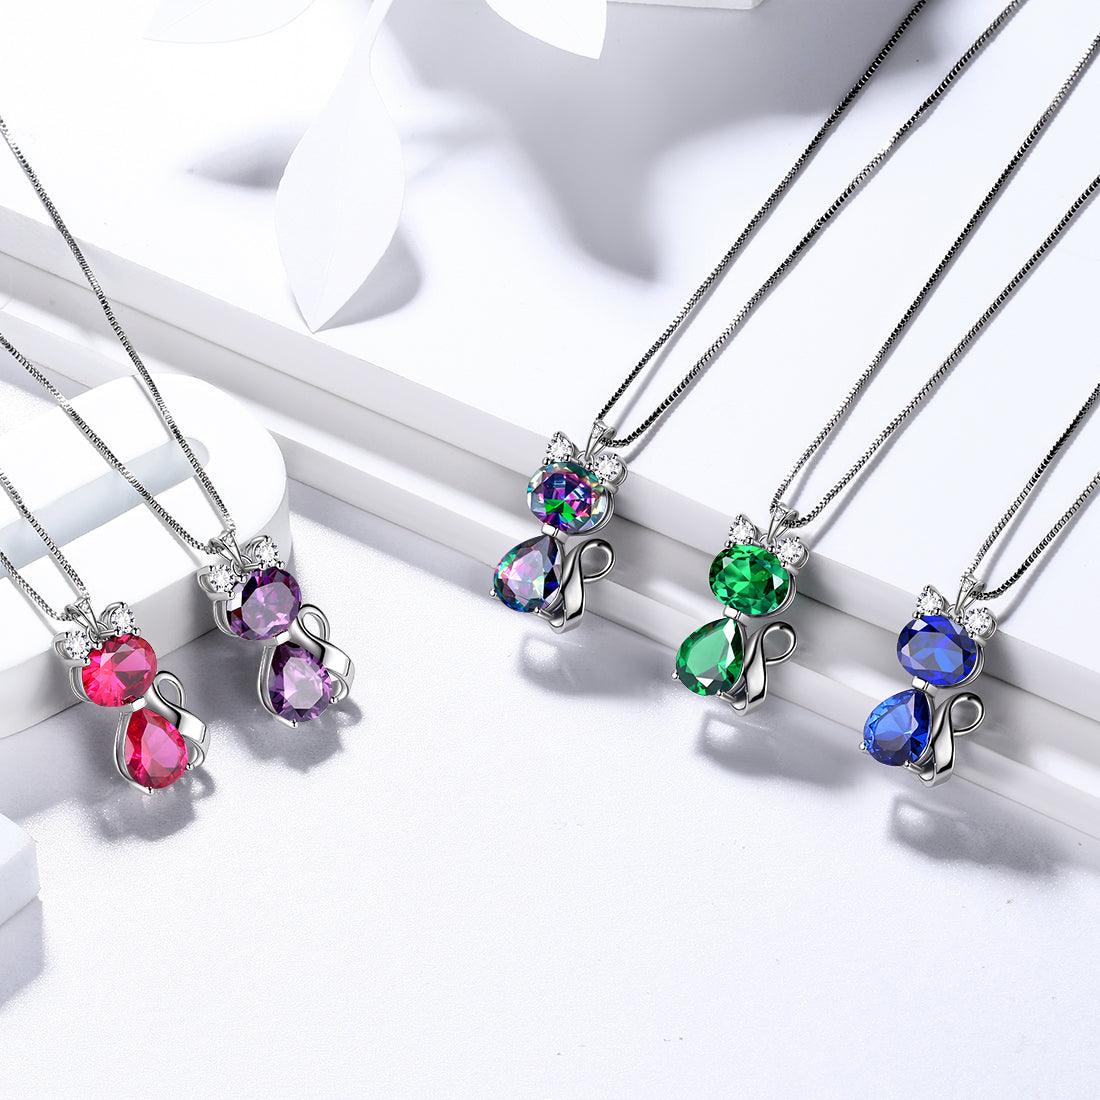 Cat Birthstone July Ruby Necklace Sterling Silver - Necklaces - Aurora Tears